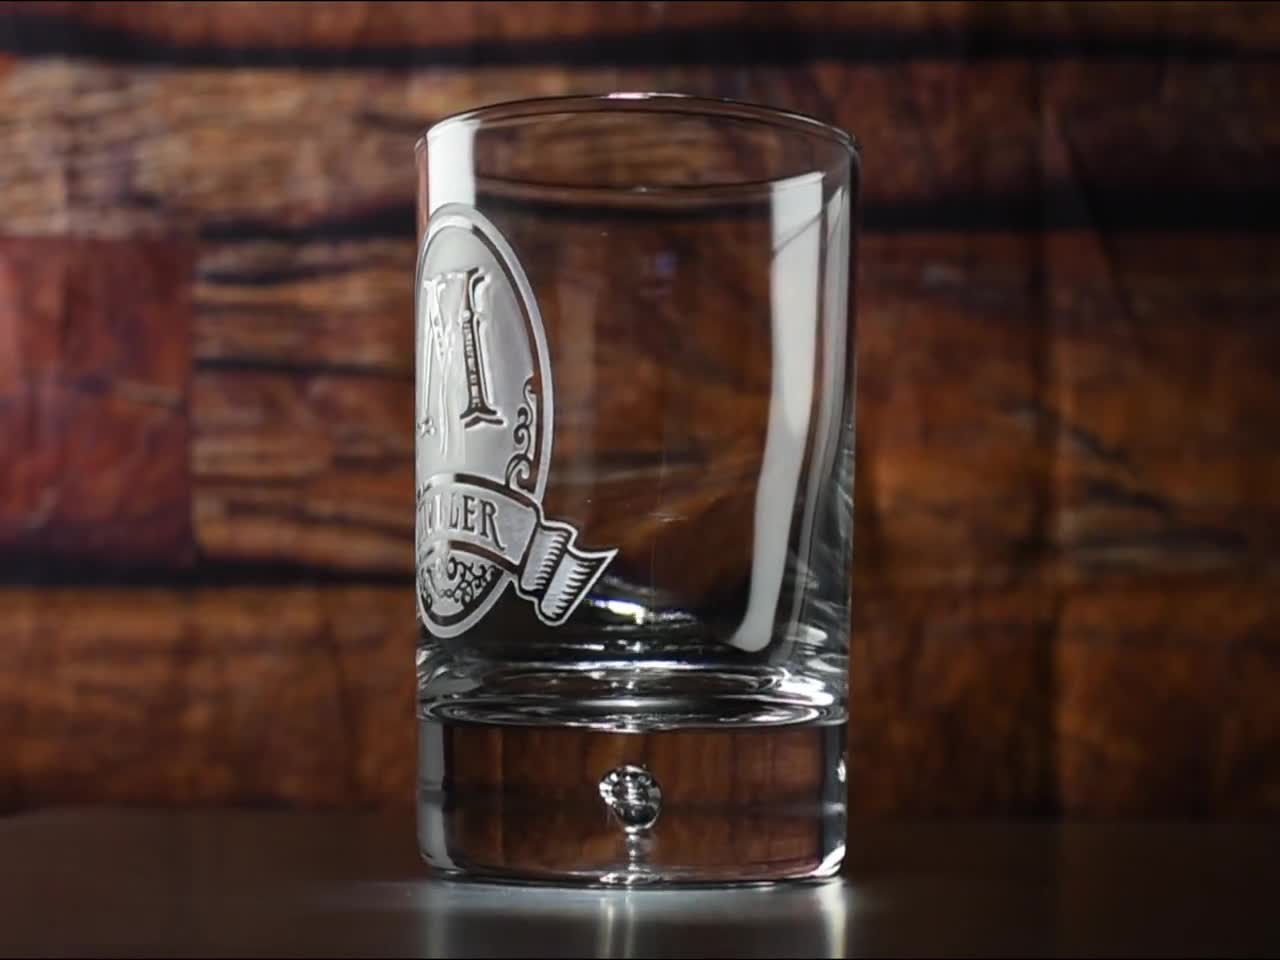 Wedding Beer Glass for the Ladies with Bow - Design Imagery Engraving